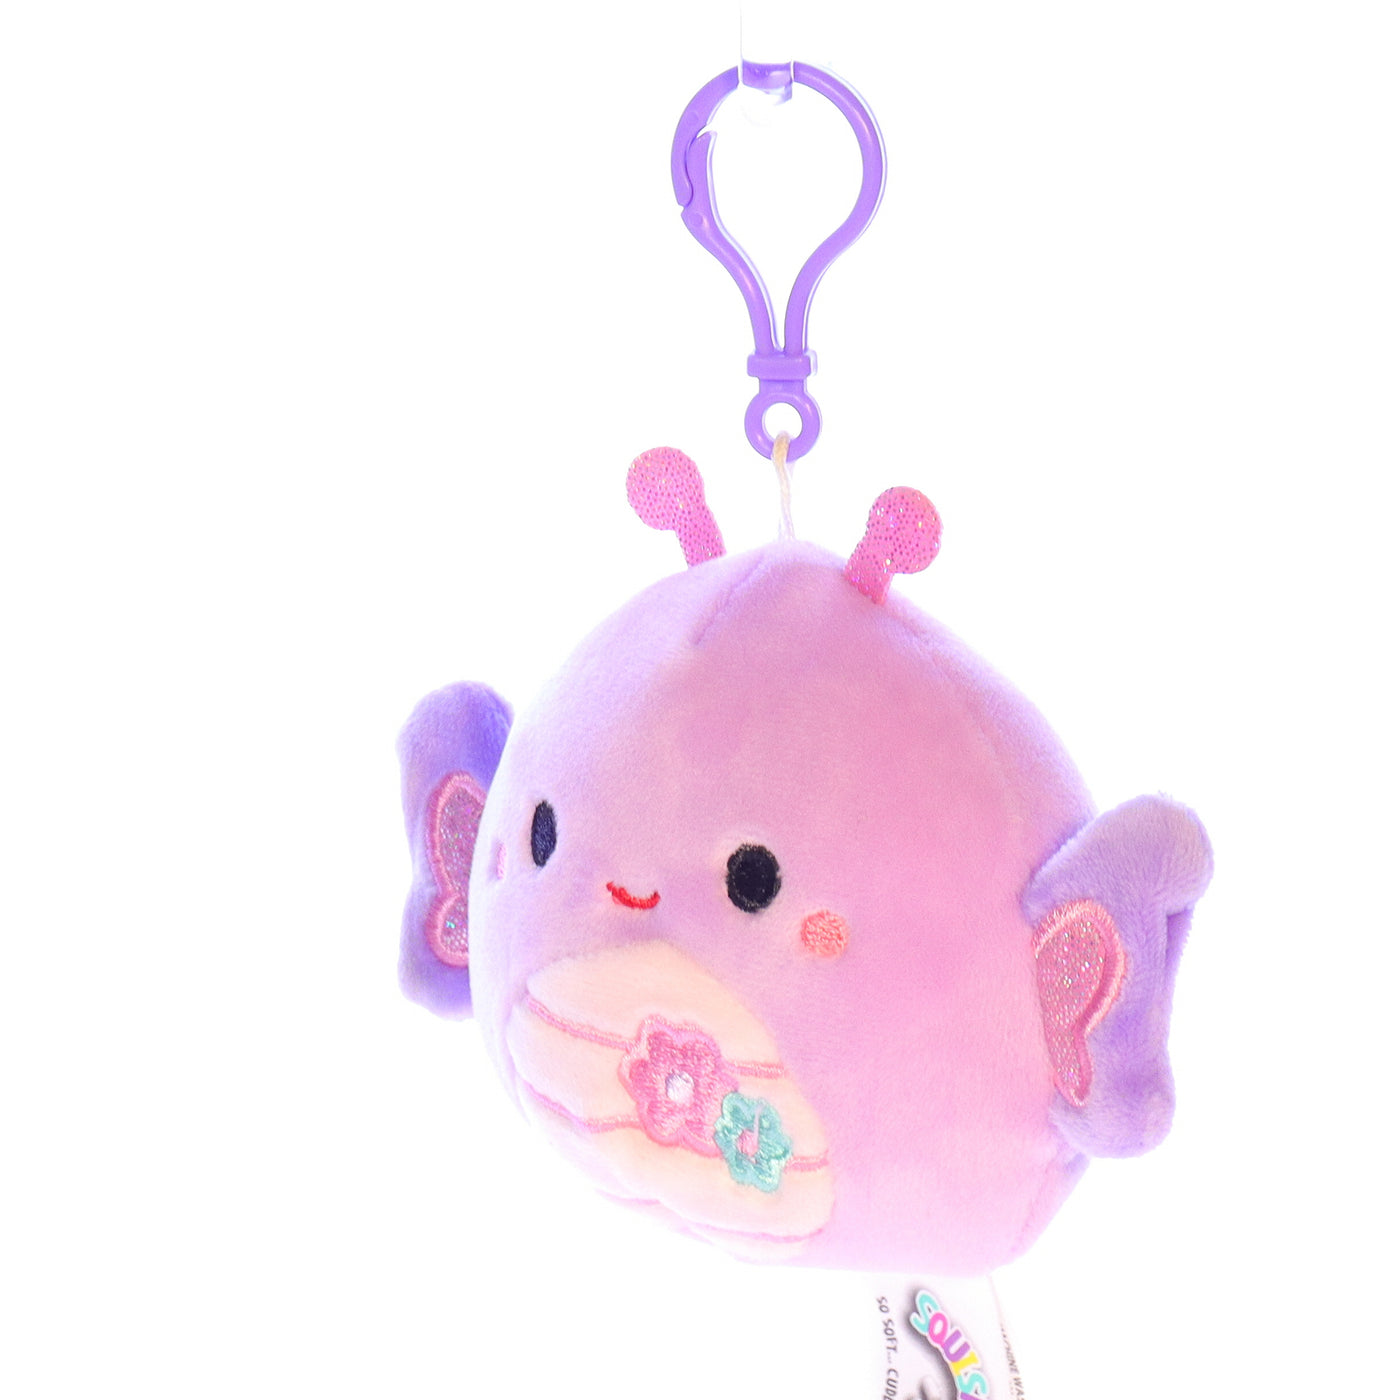 Squishmallows_734689975198_Brenda_the_Butterfly_Keychain_Stuffed_Animal_2019 Front Left View